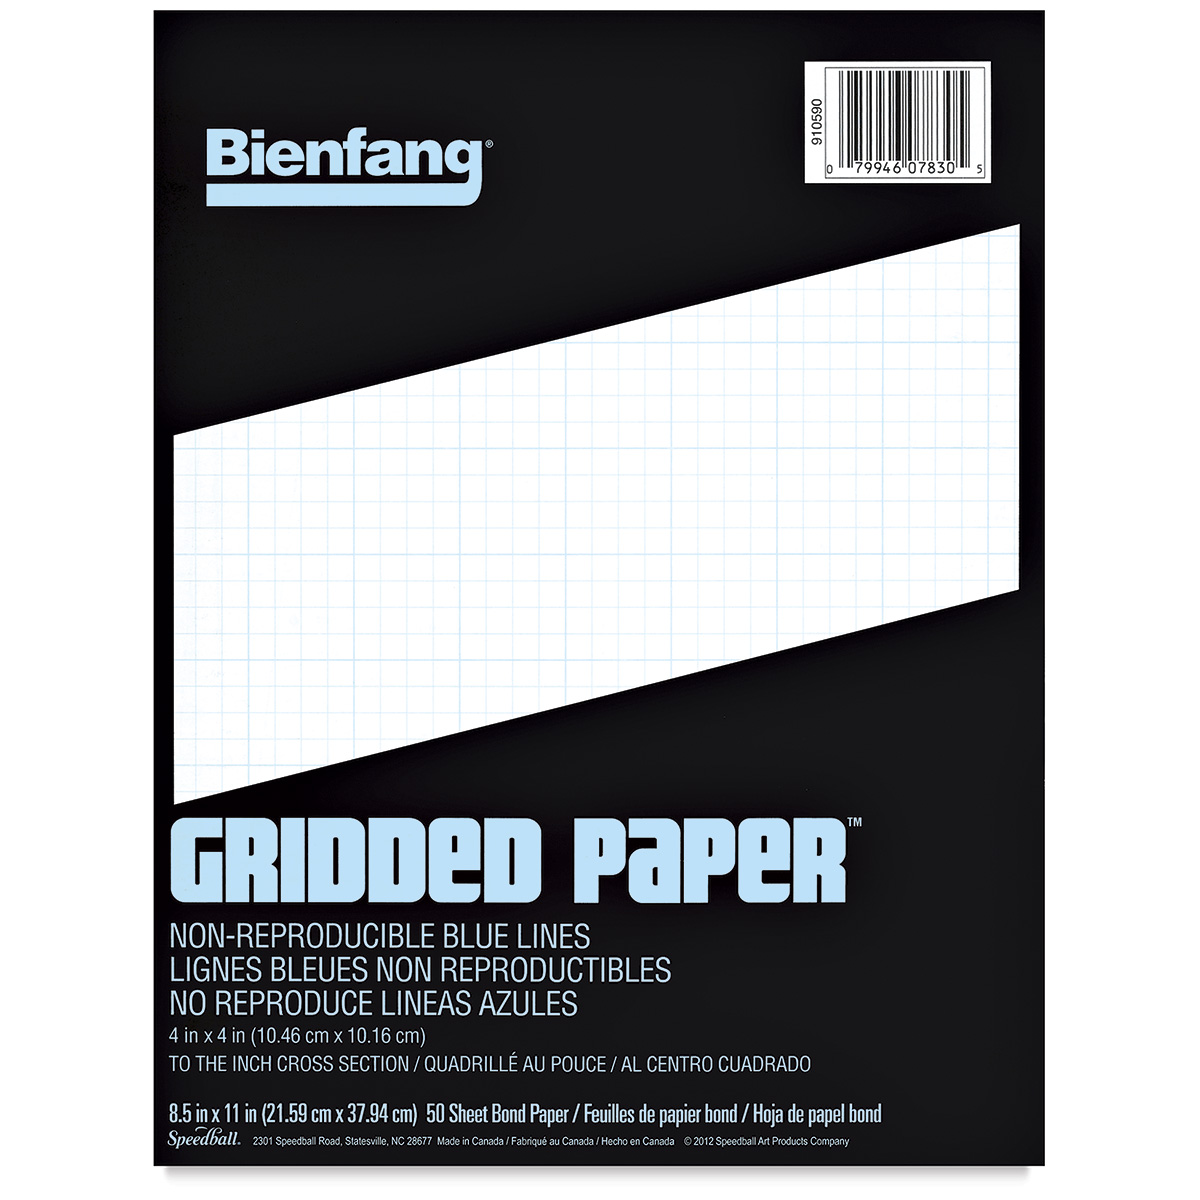 Bienfang Designer Grid Paper Pad 11 x 17 inches 50 sheets 8x8 Cross Section 